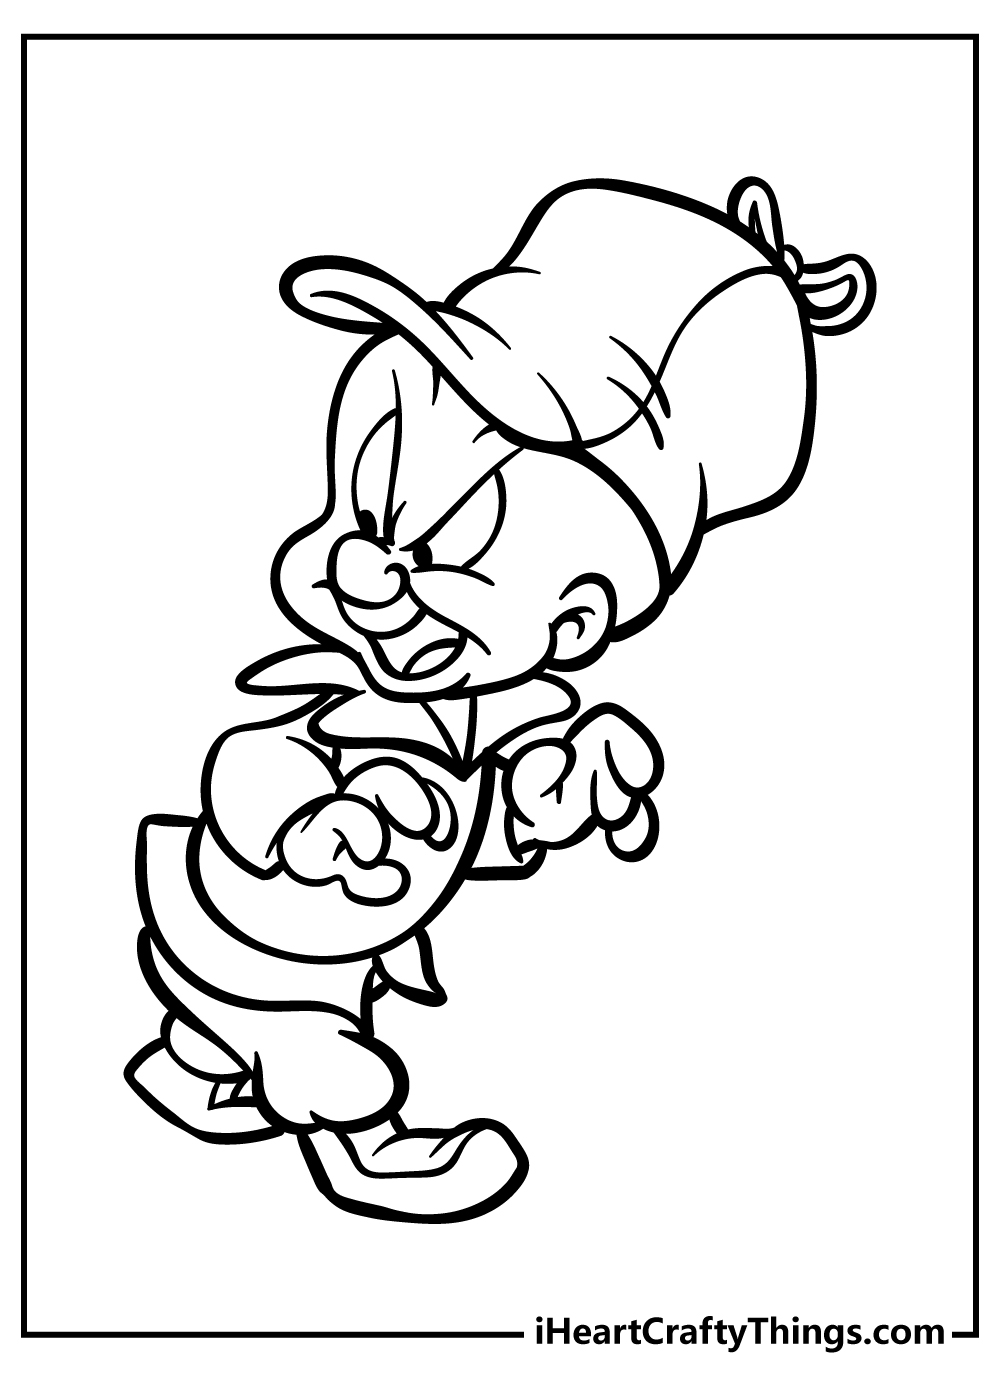 Looney Tunes Coloring Book for kids free printable